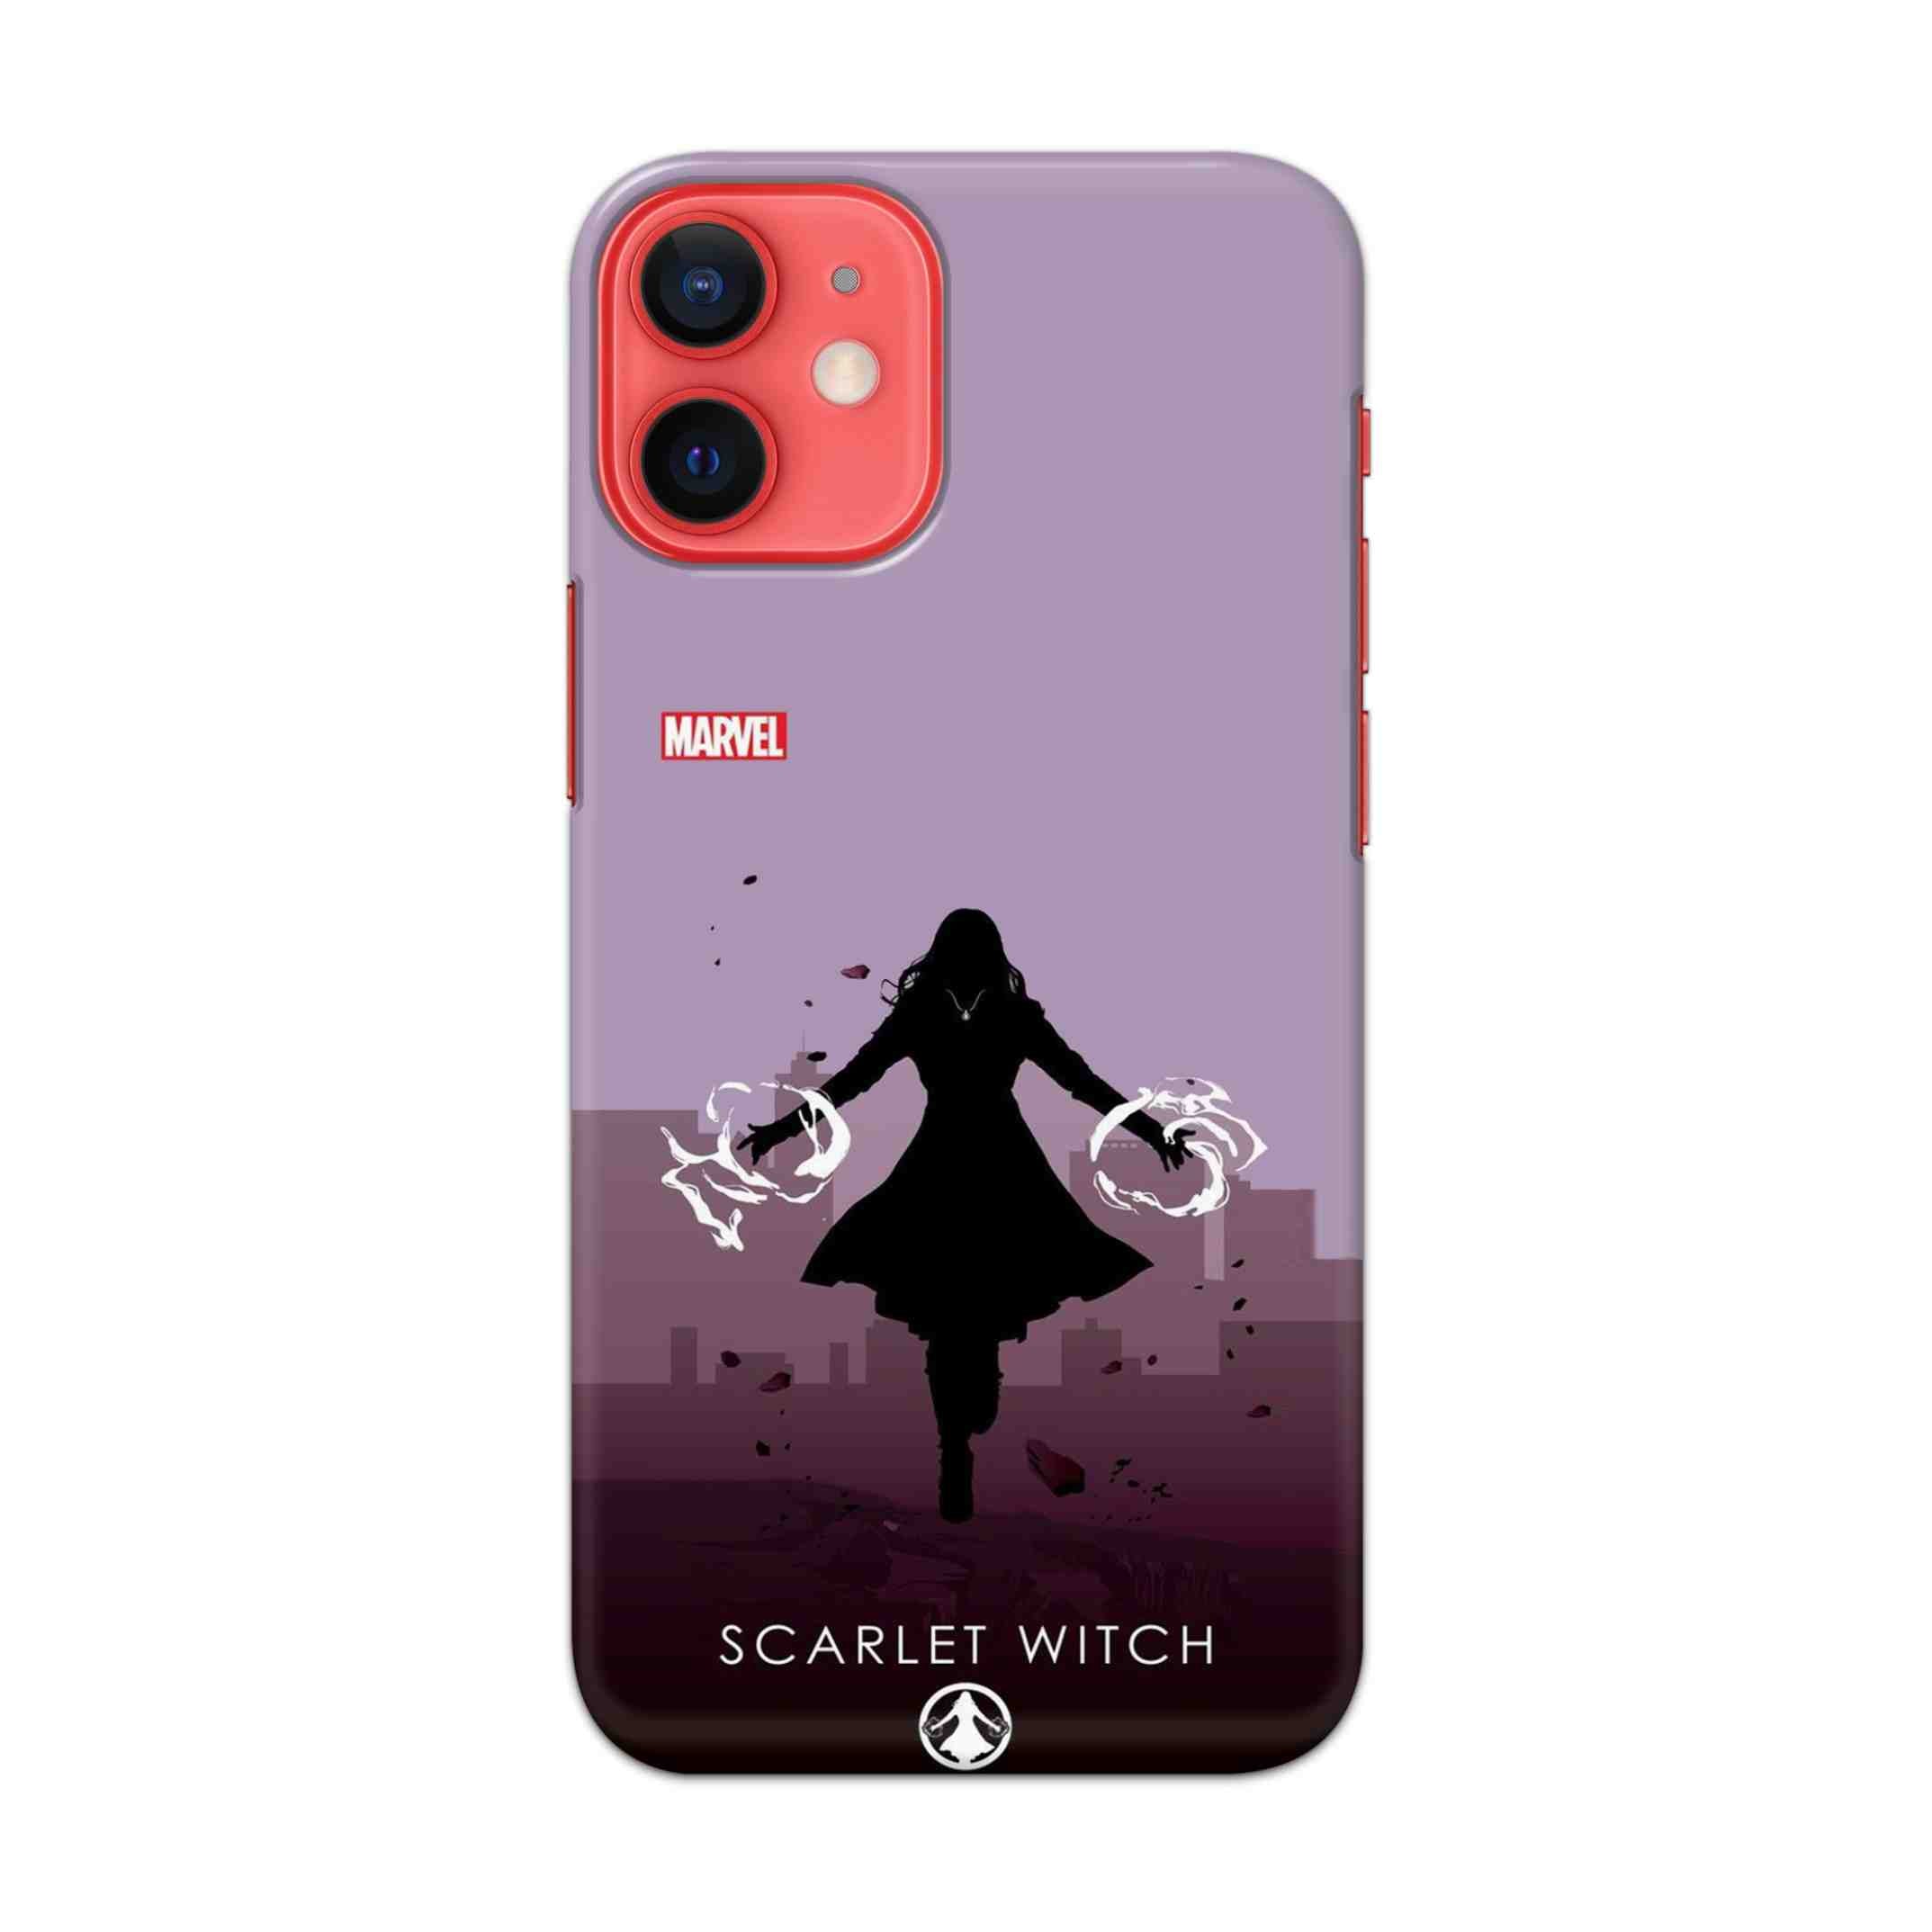 Buy Scarlet Witch Hard Back Mobile Phone Case/Cover For Apple iPhone 12 mini Online